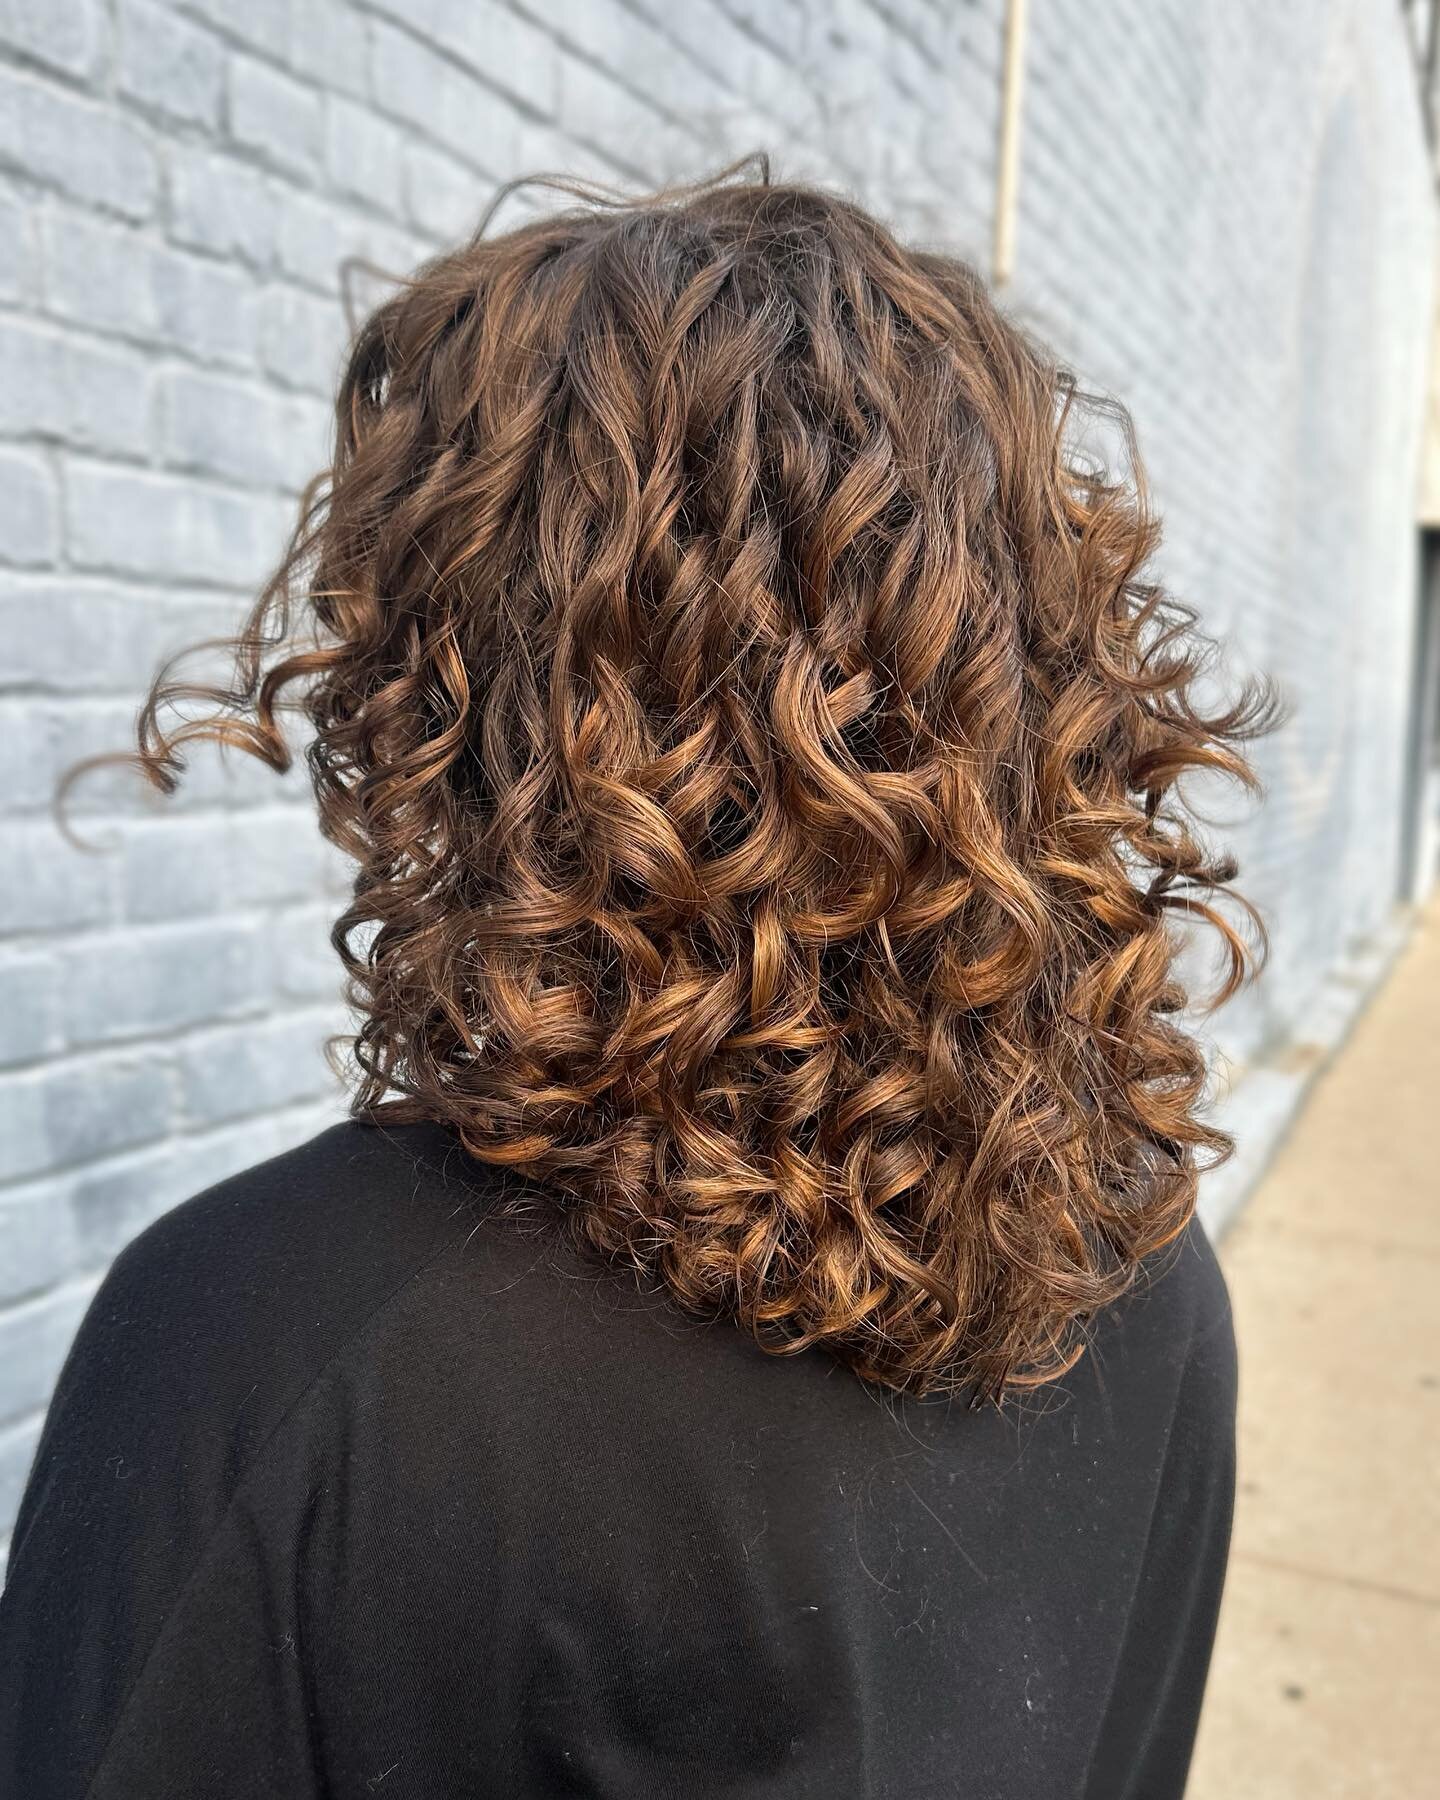 Curly cut + natural balayage to bring out those curlssss. 😍 (Featuring the single curl that the wind picked up) 
Styled with @evohair Total Recoil and Liquid rollers. 

#chachasalon #lex #lexky #lexingtonkentucky #lexingtonhair #lexingtonhairstylist